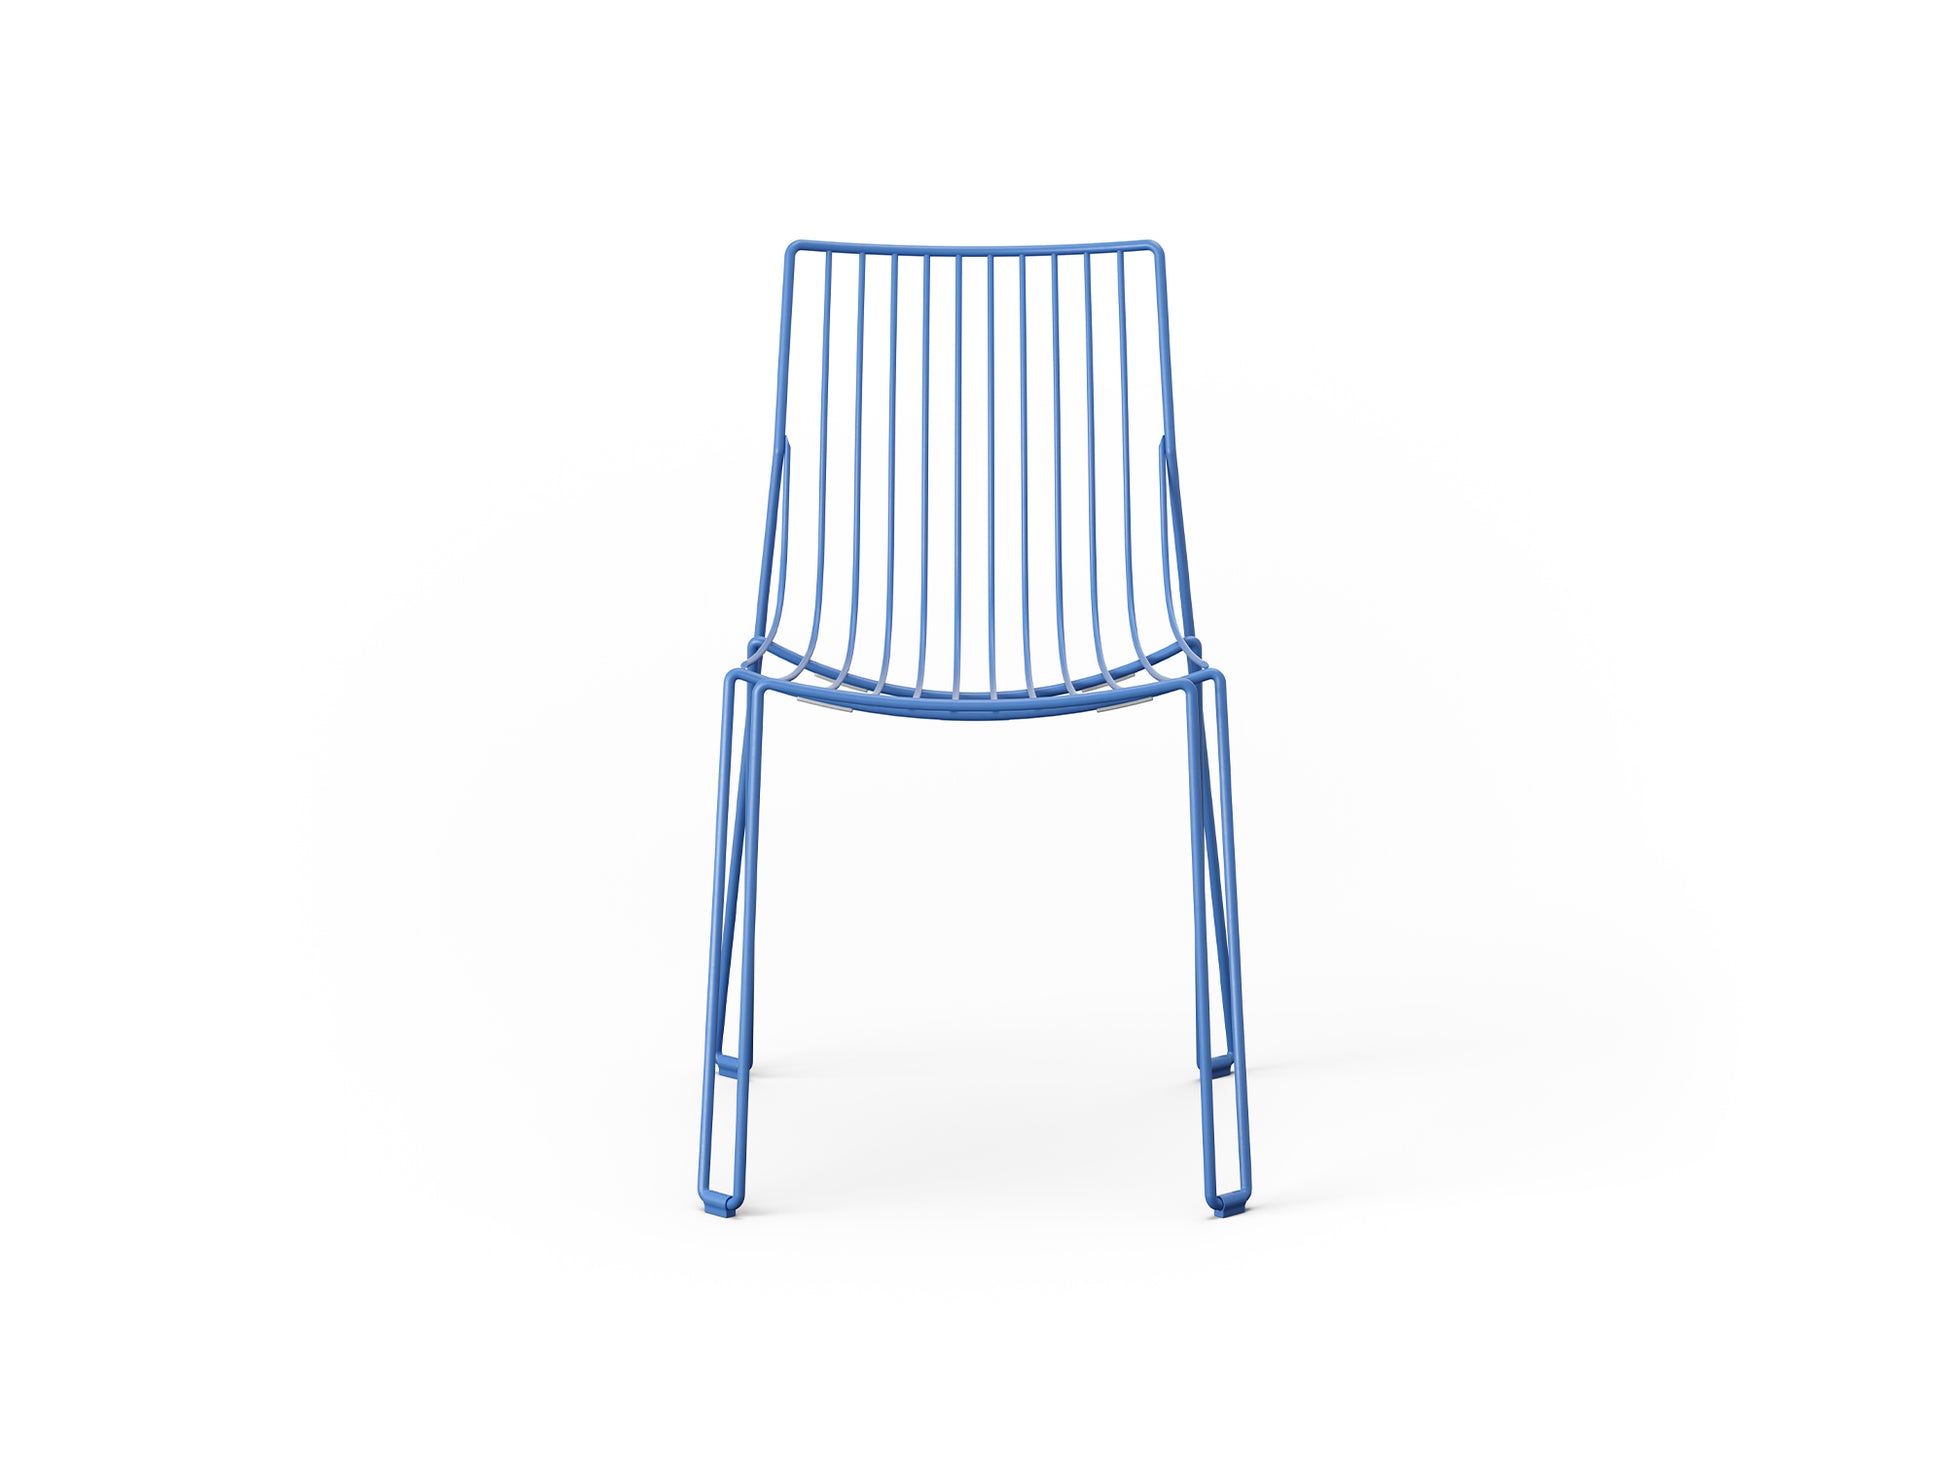 Massproductions Tio Chair in Overseas Blue